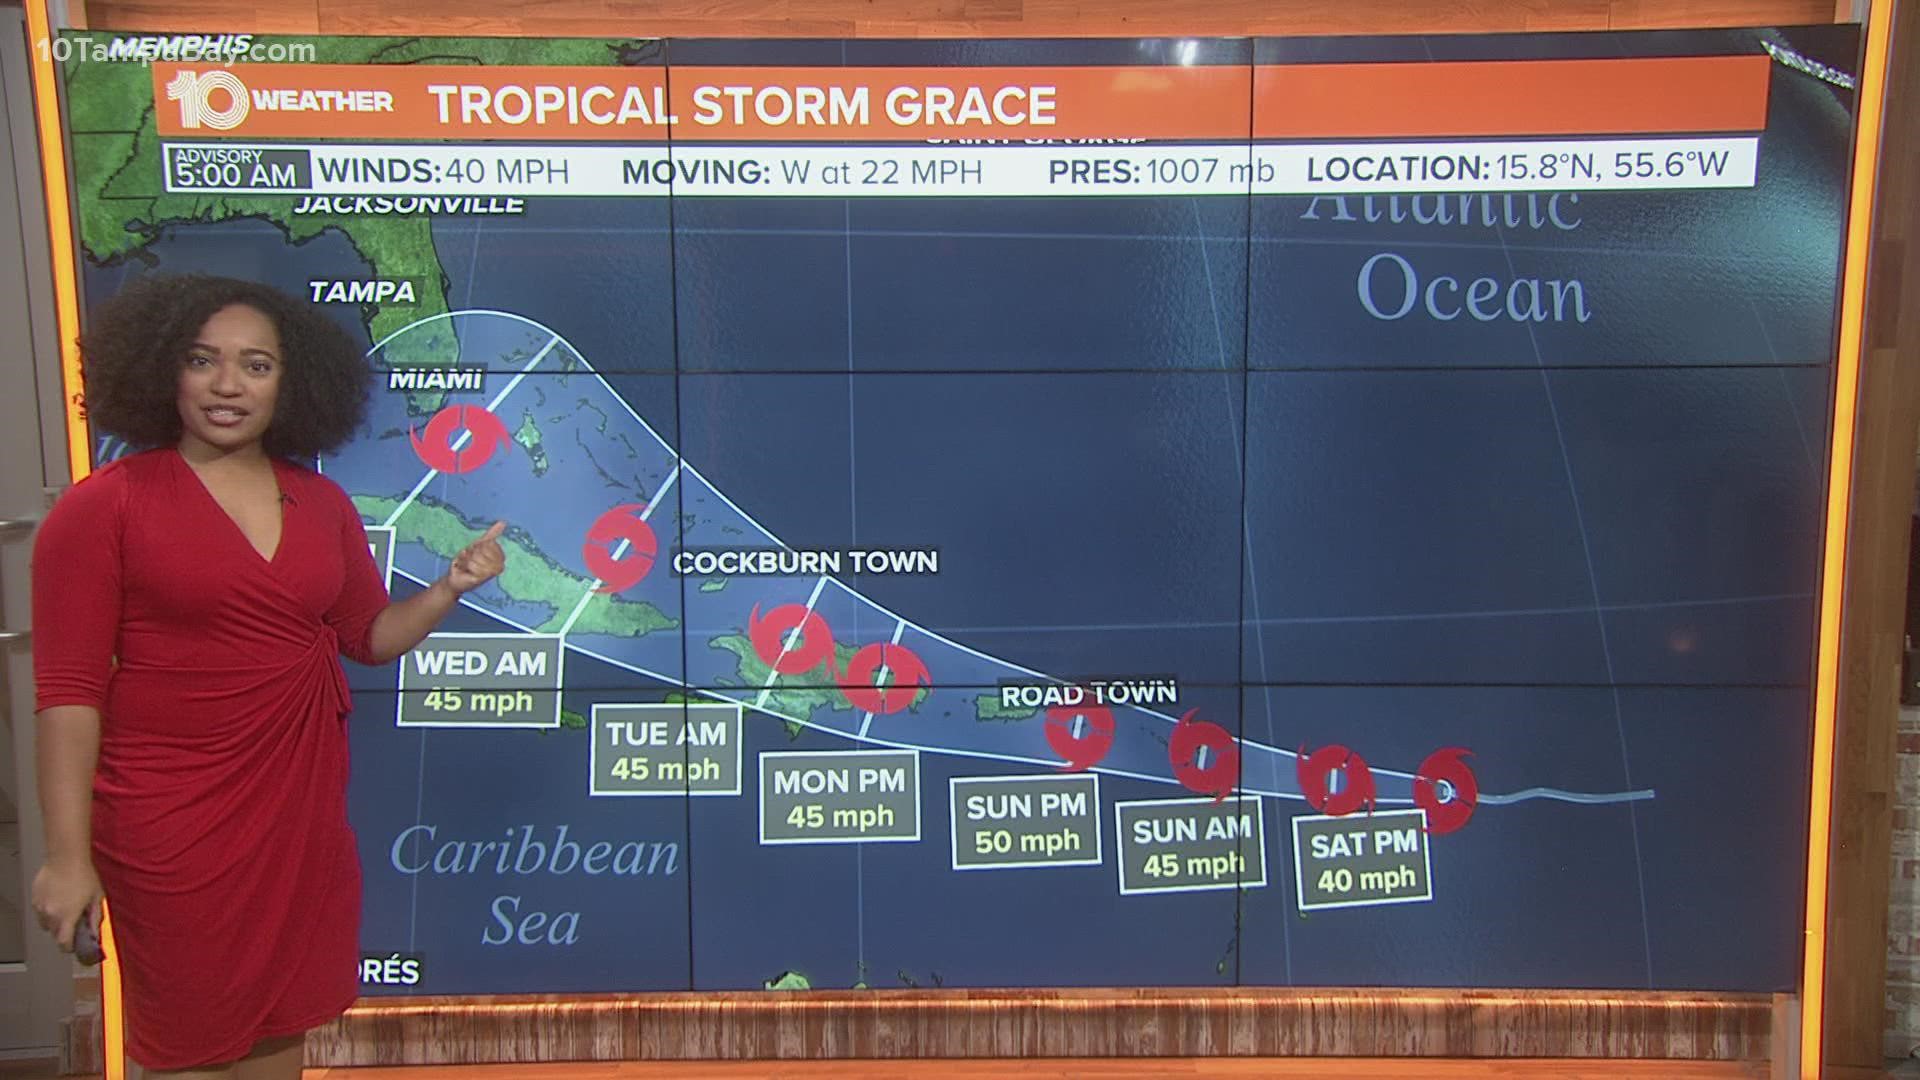 The southern part of the Sunshine State is in the storm's cone of uncertainty.